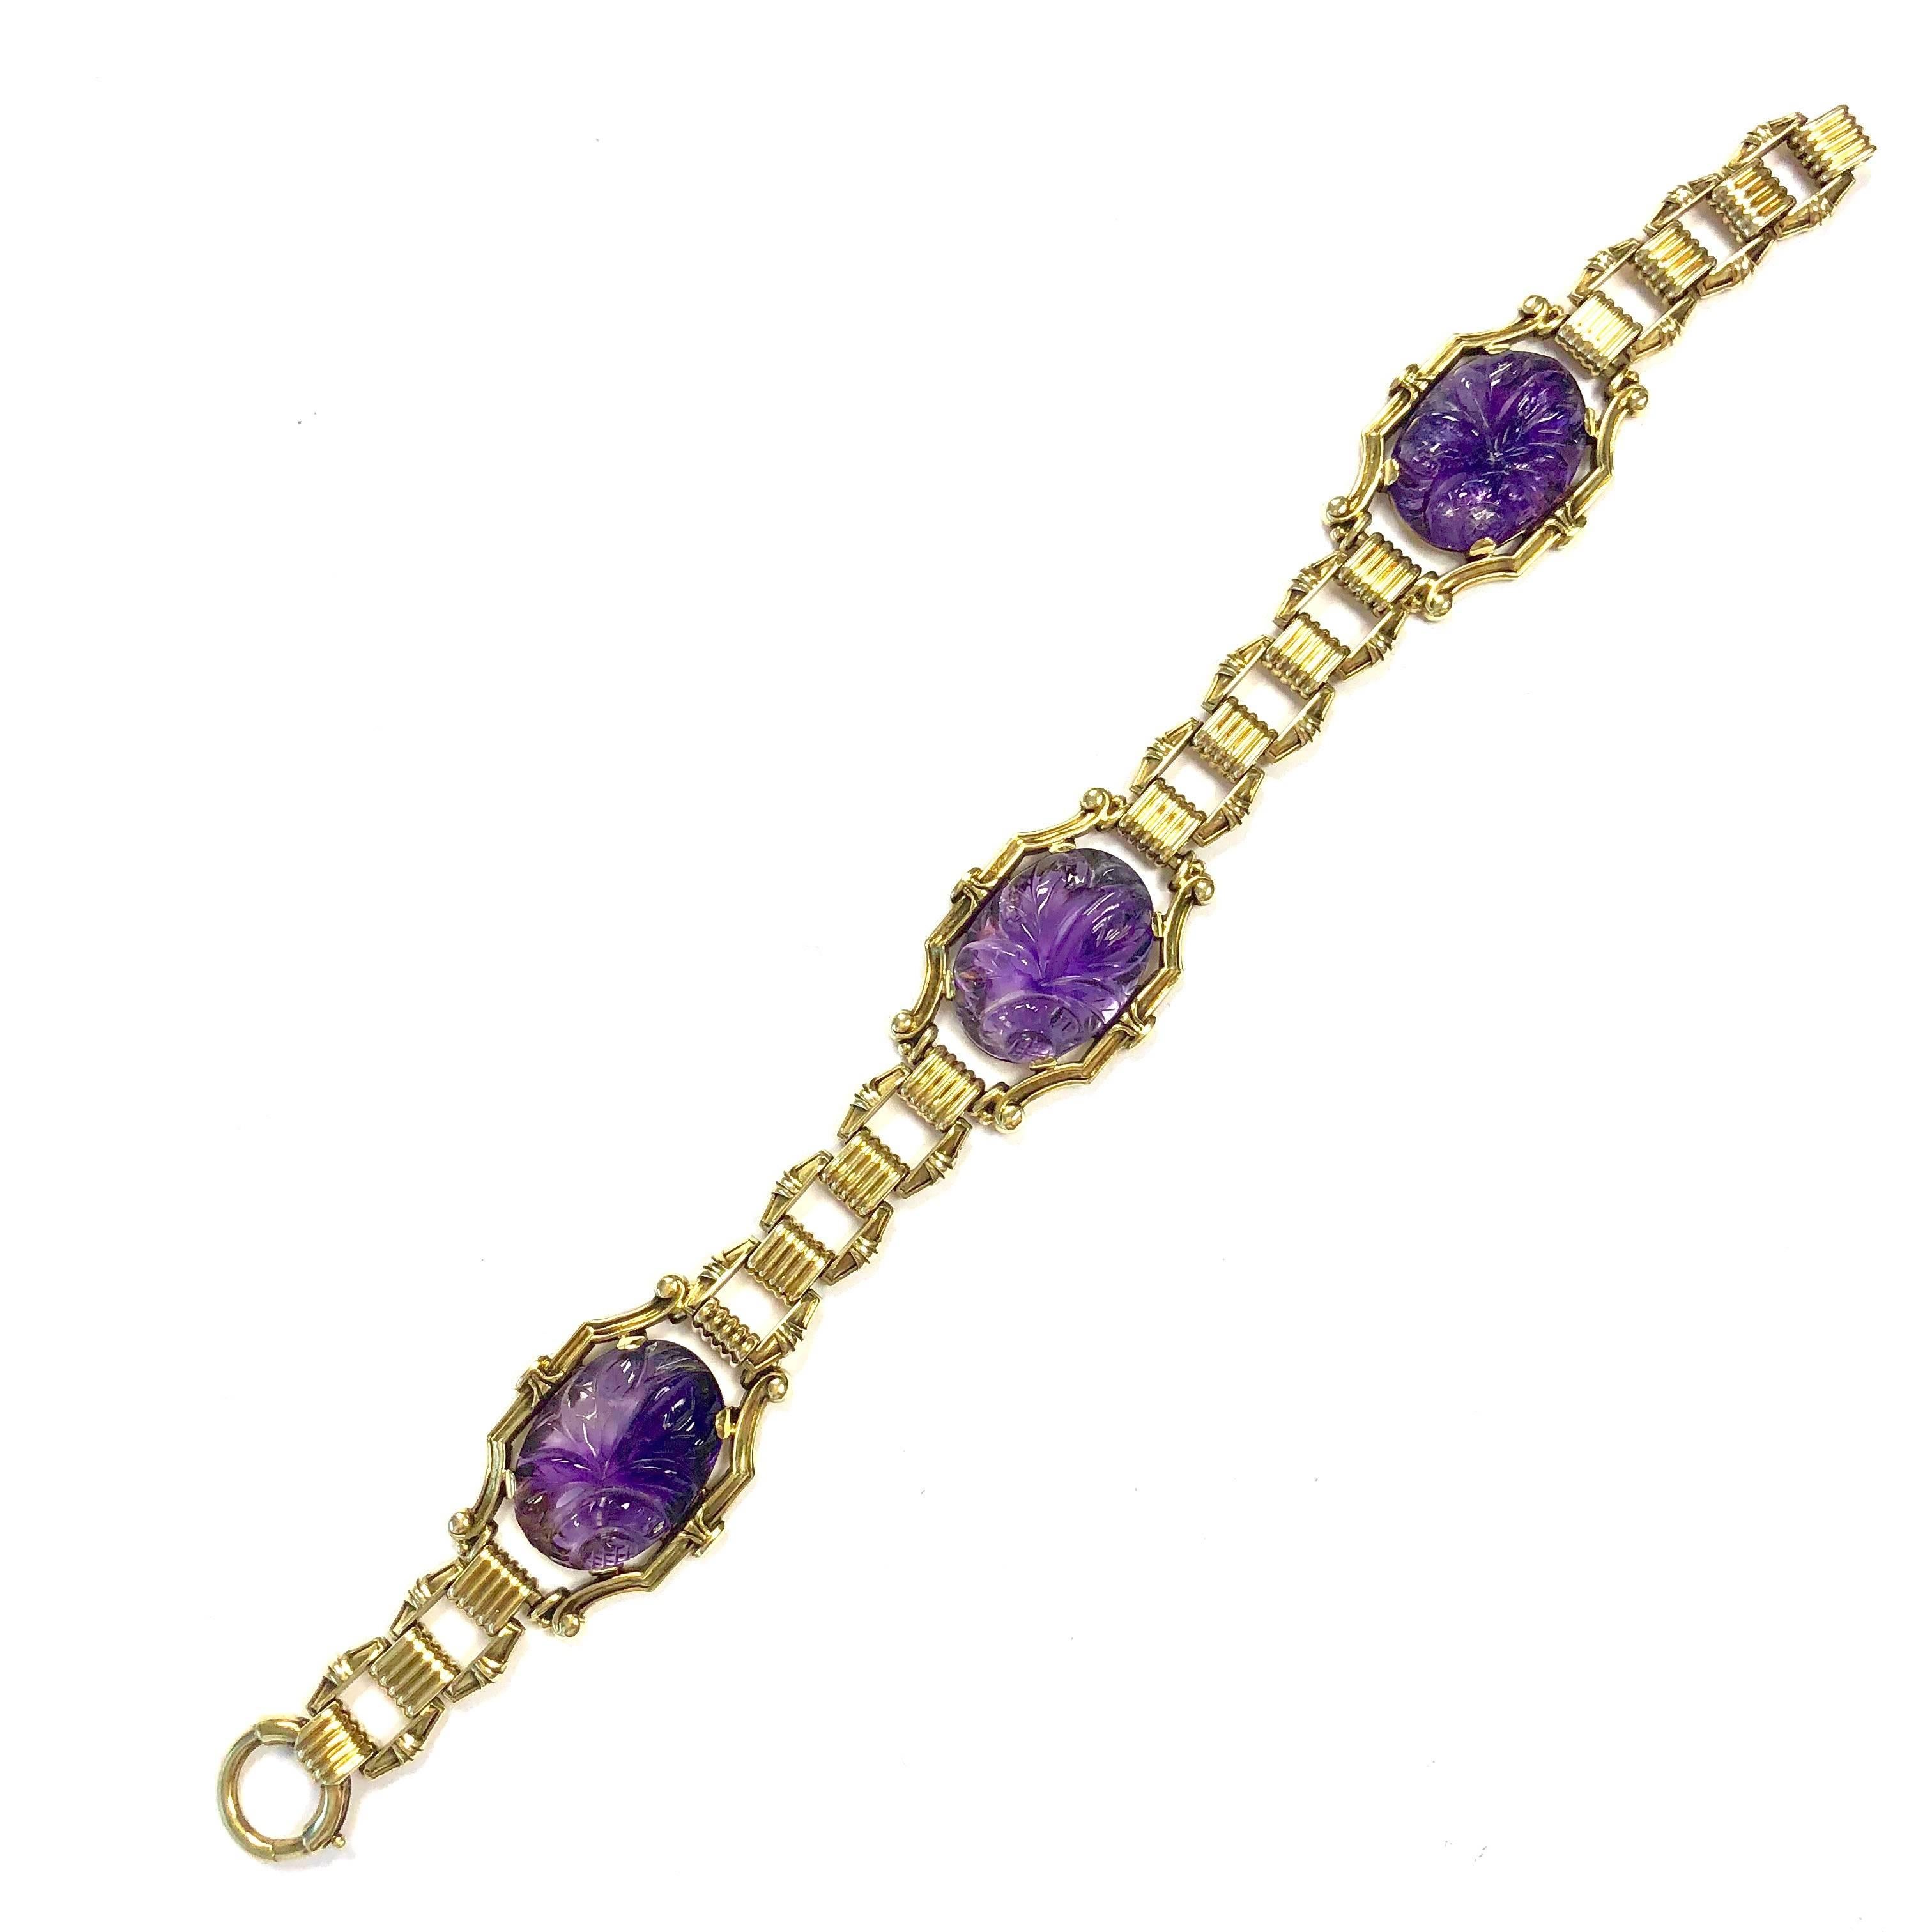 This gorgeous bracelet features three 18x13mm oval carved amethyst cabochons set within stylized gold bezels. Seven inch length terminating in a spring ring clasp. Width: 3/4